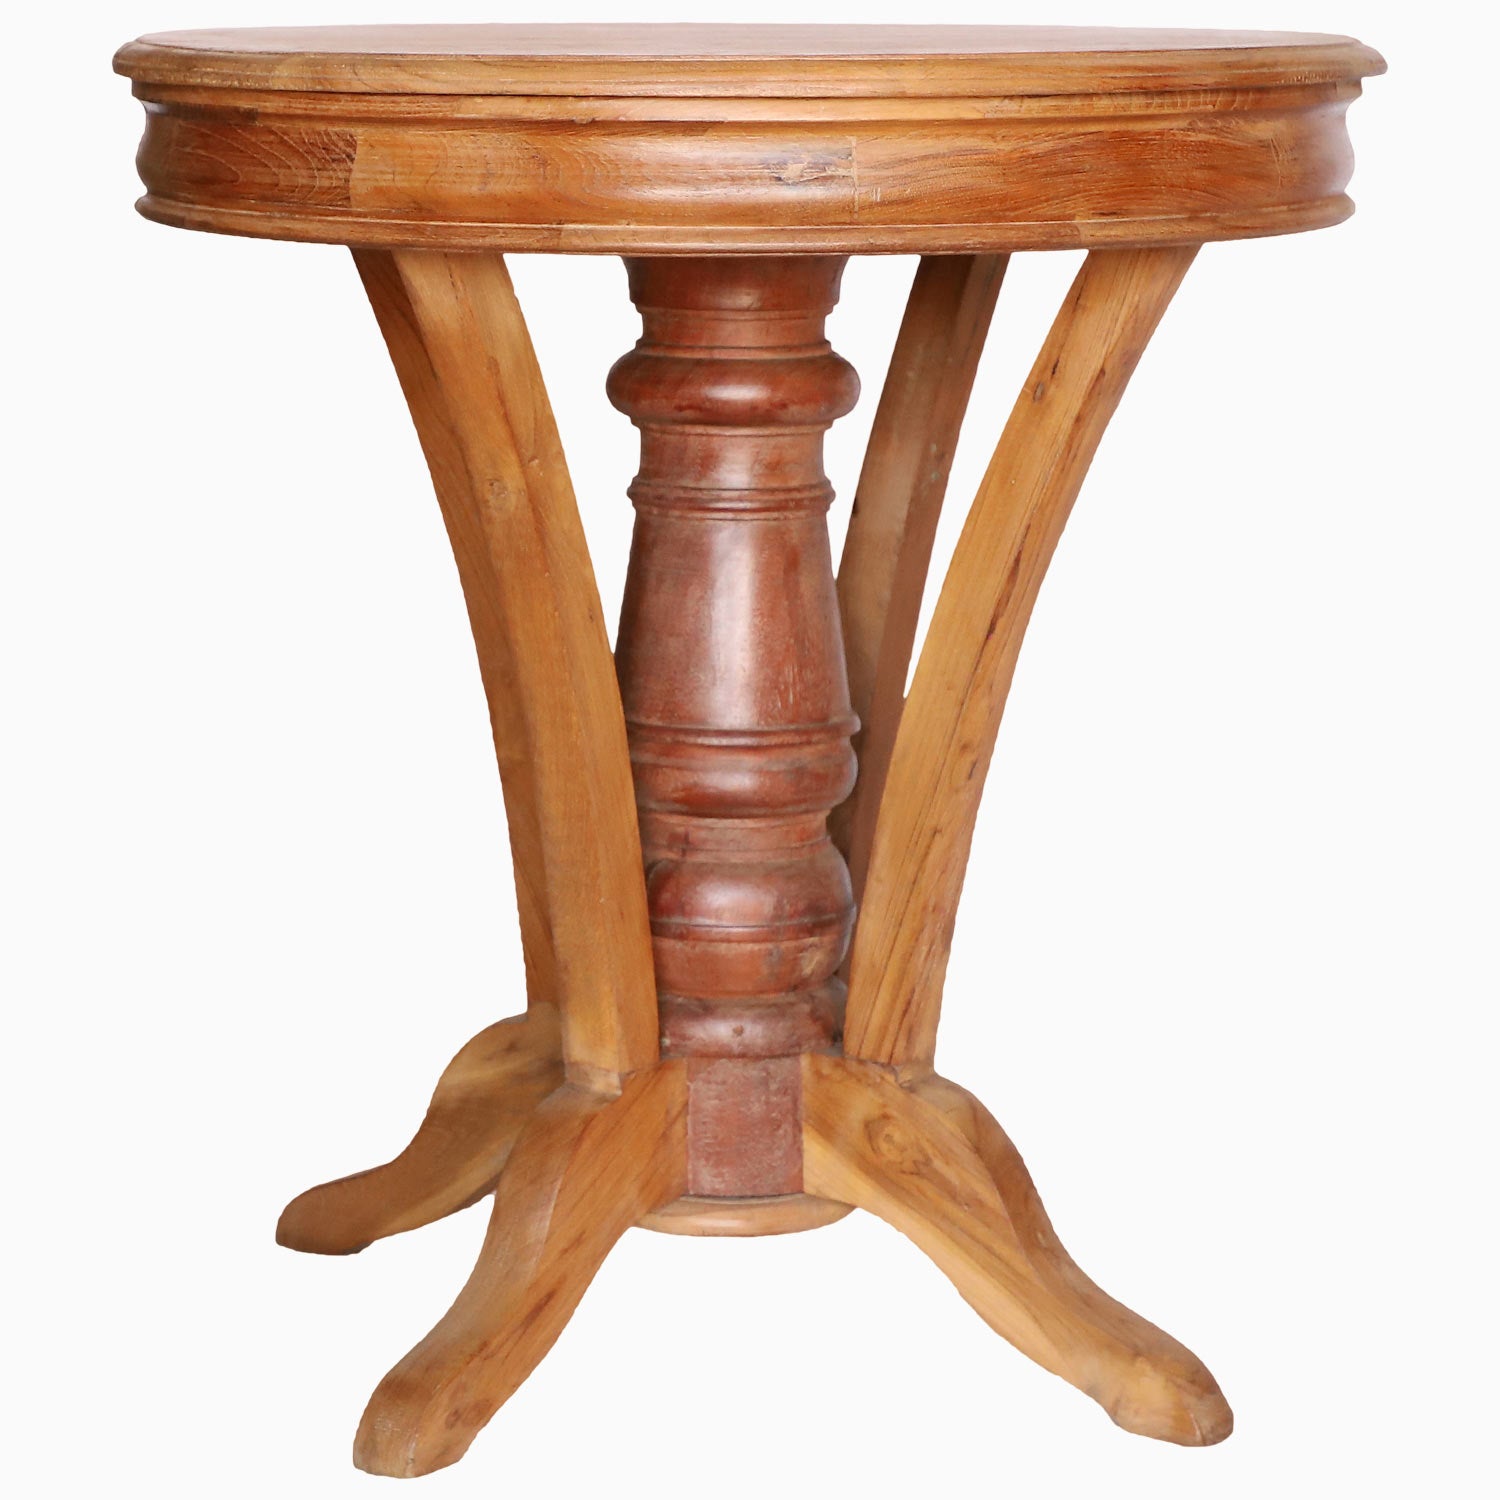 Wooden Teak Round Table With Curved Legs Main